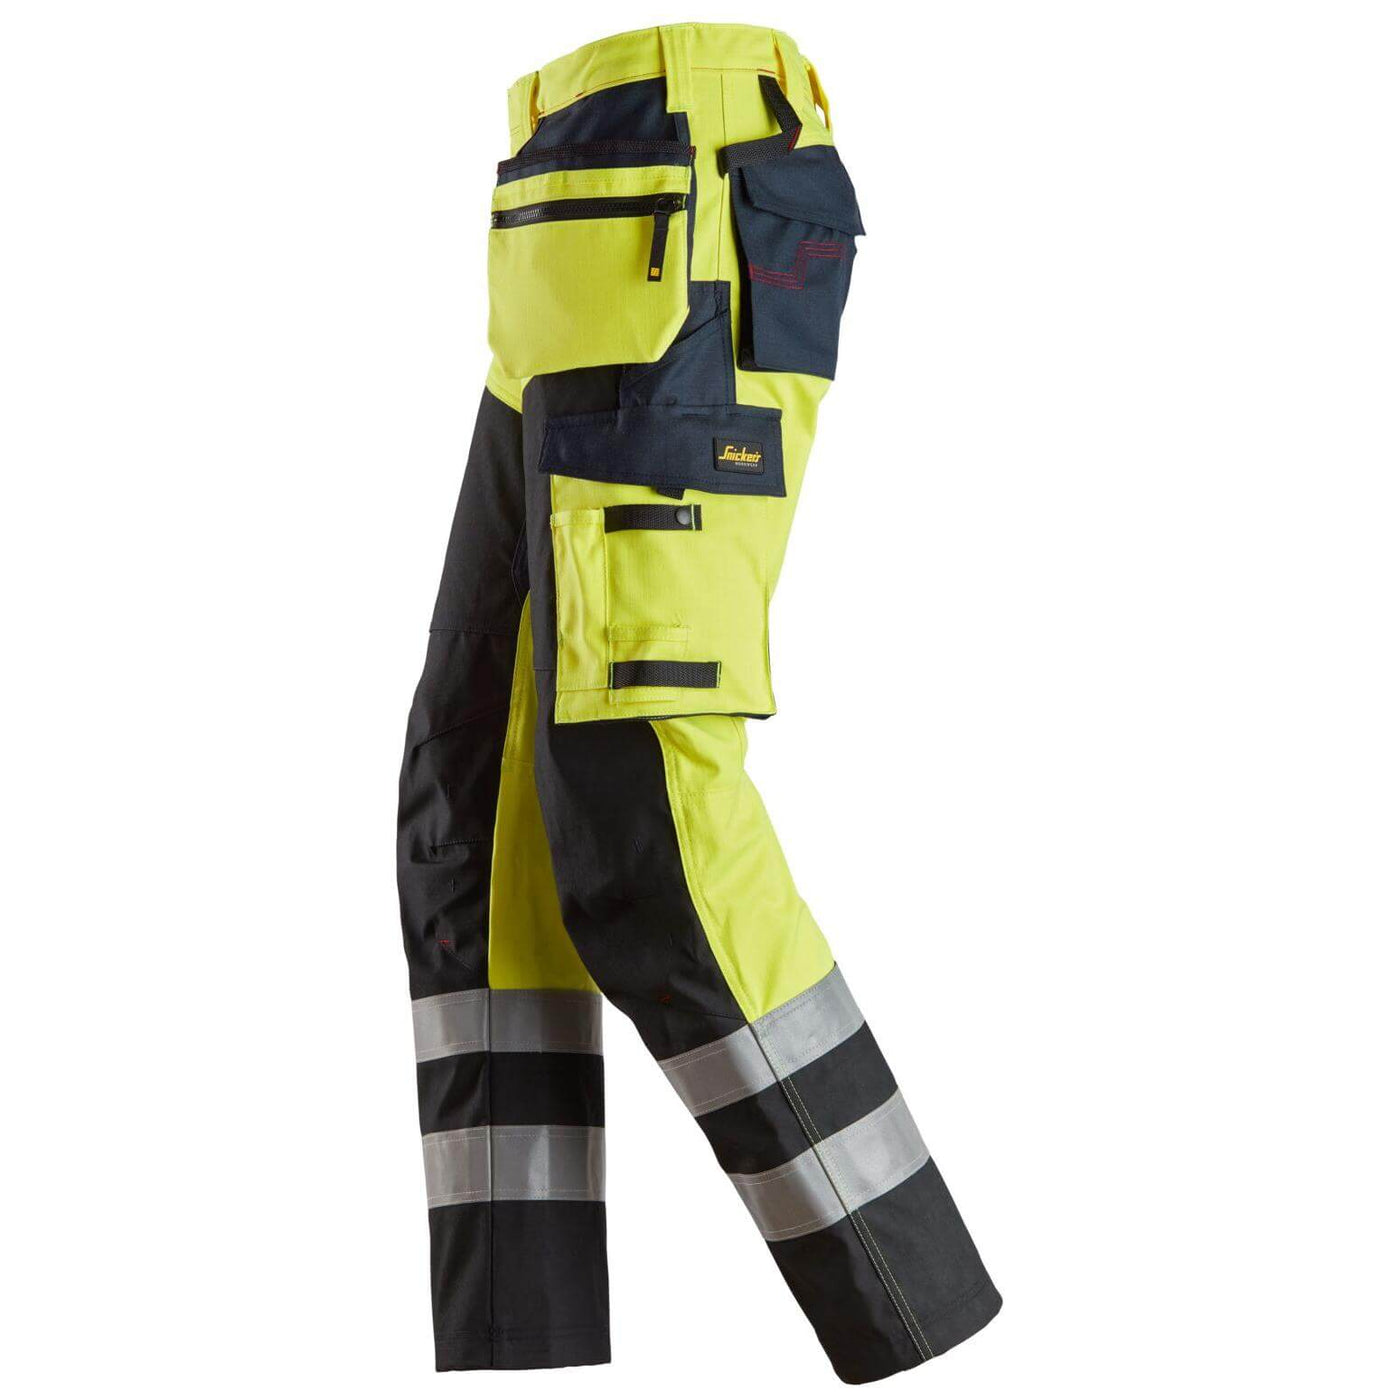 Snickers 6265 ProtecWork Hi Vis Trousers with Reinforced Front of Leg and Holster Pockets Class 1 Hi Vis Yellow Navy Blue left3823273 #colour_hi-vis-yellow-navy-blue